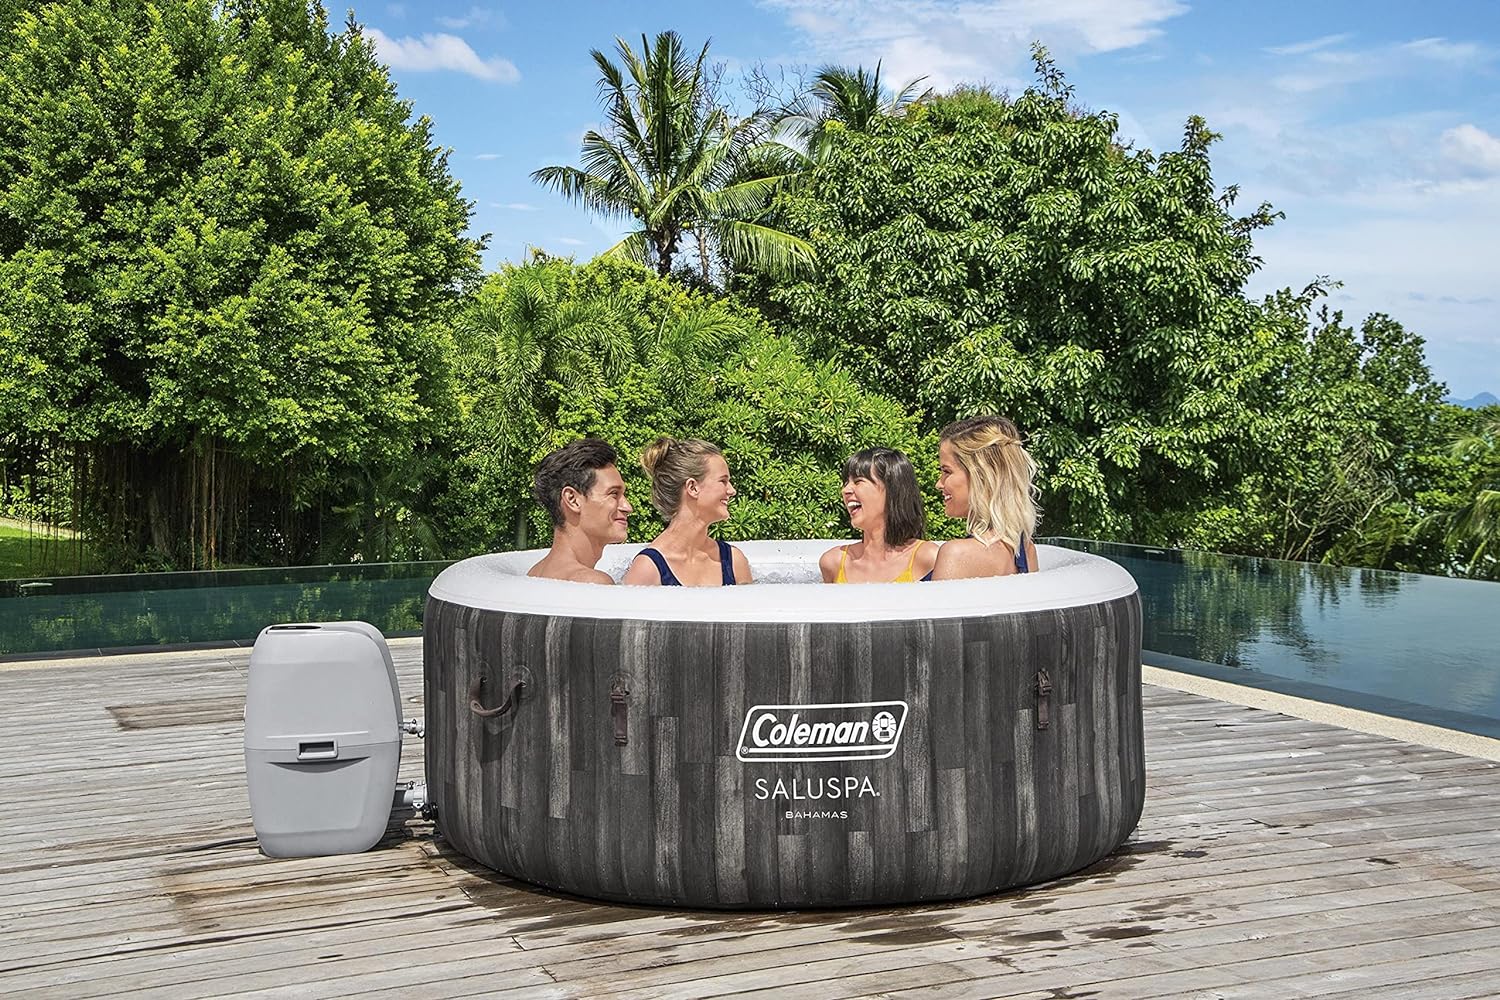 Expert Review: 7 Best Plug and Play Hot Tub Under $1000